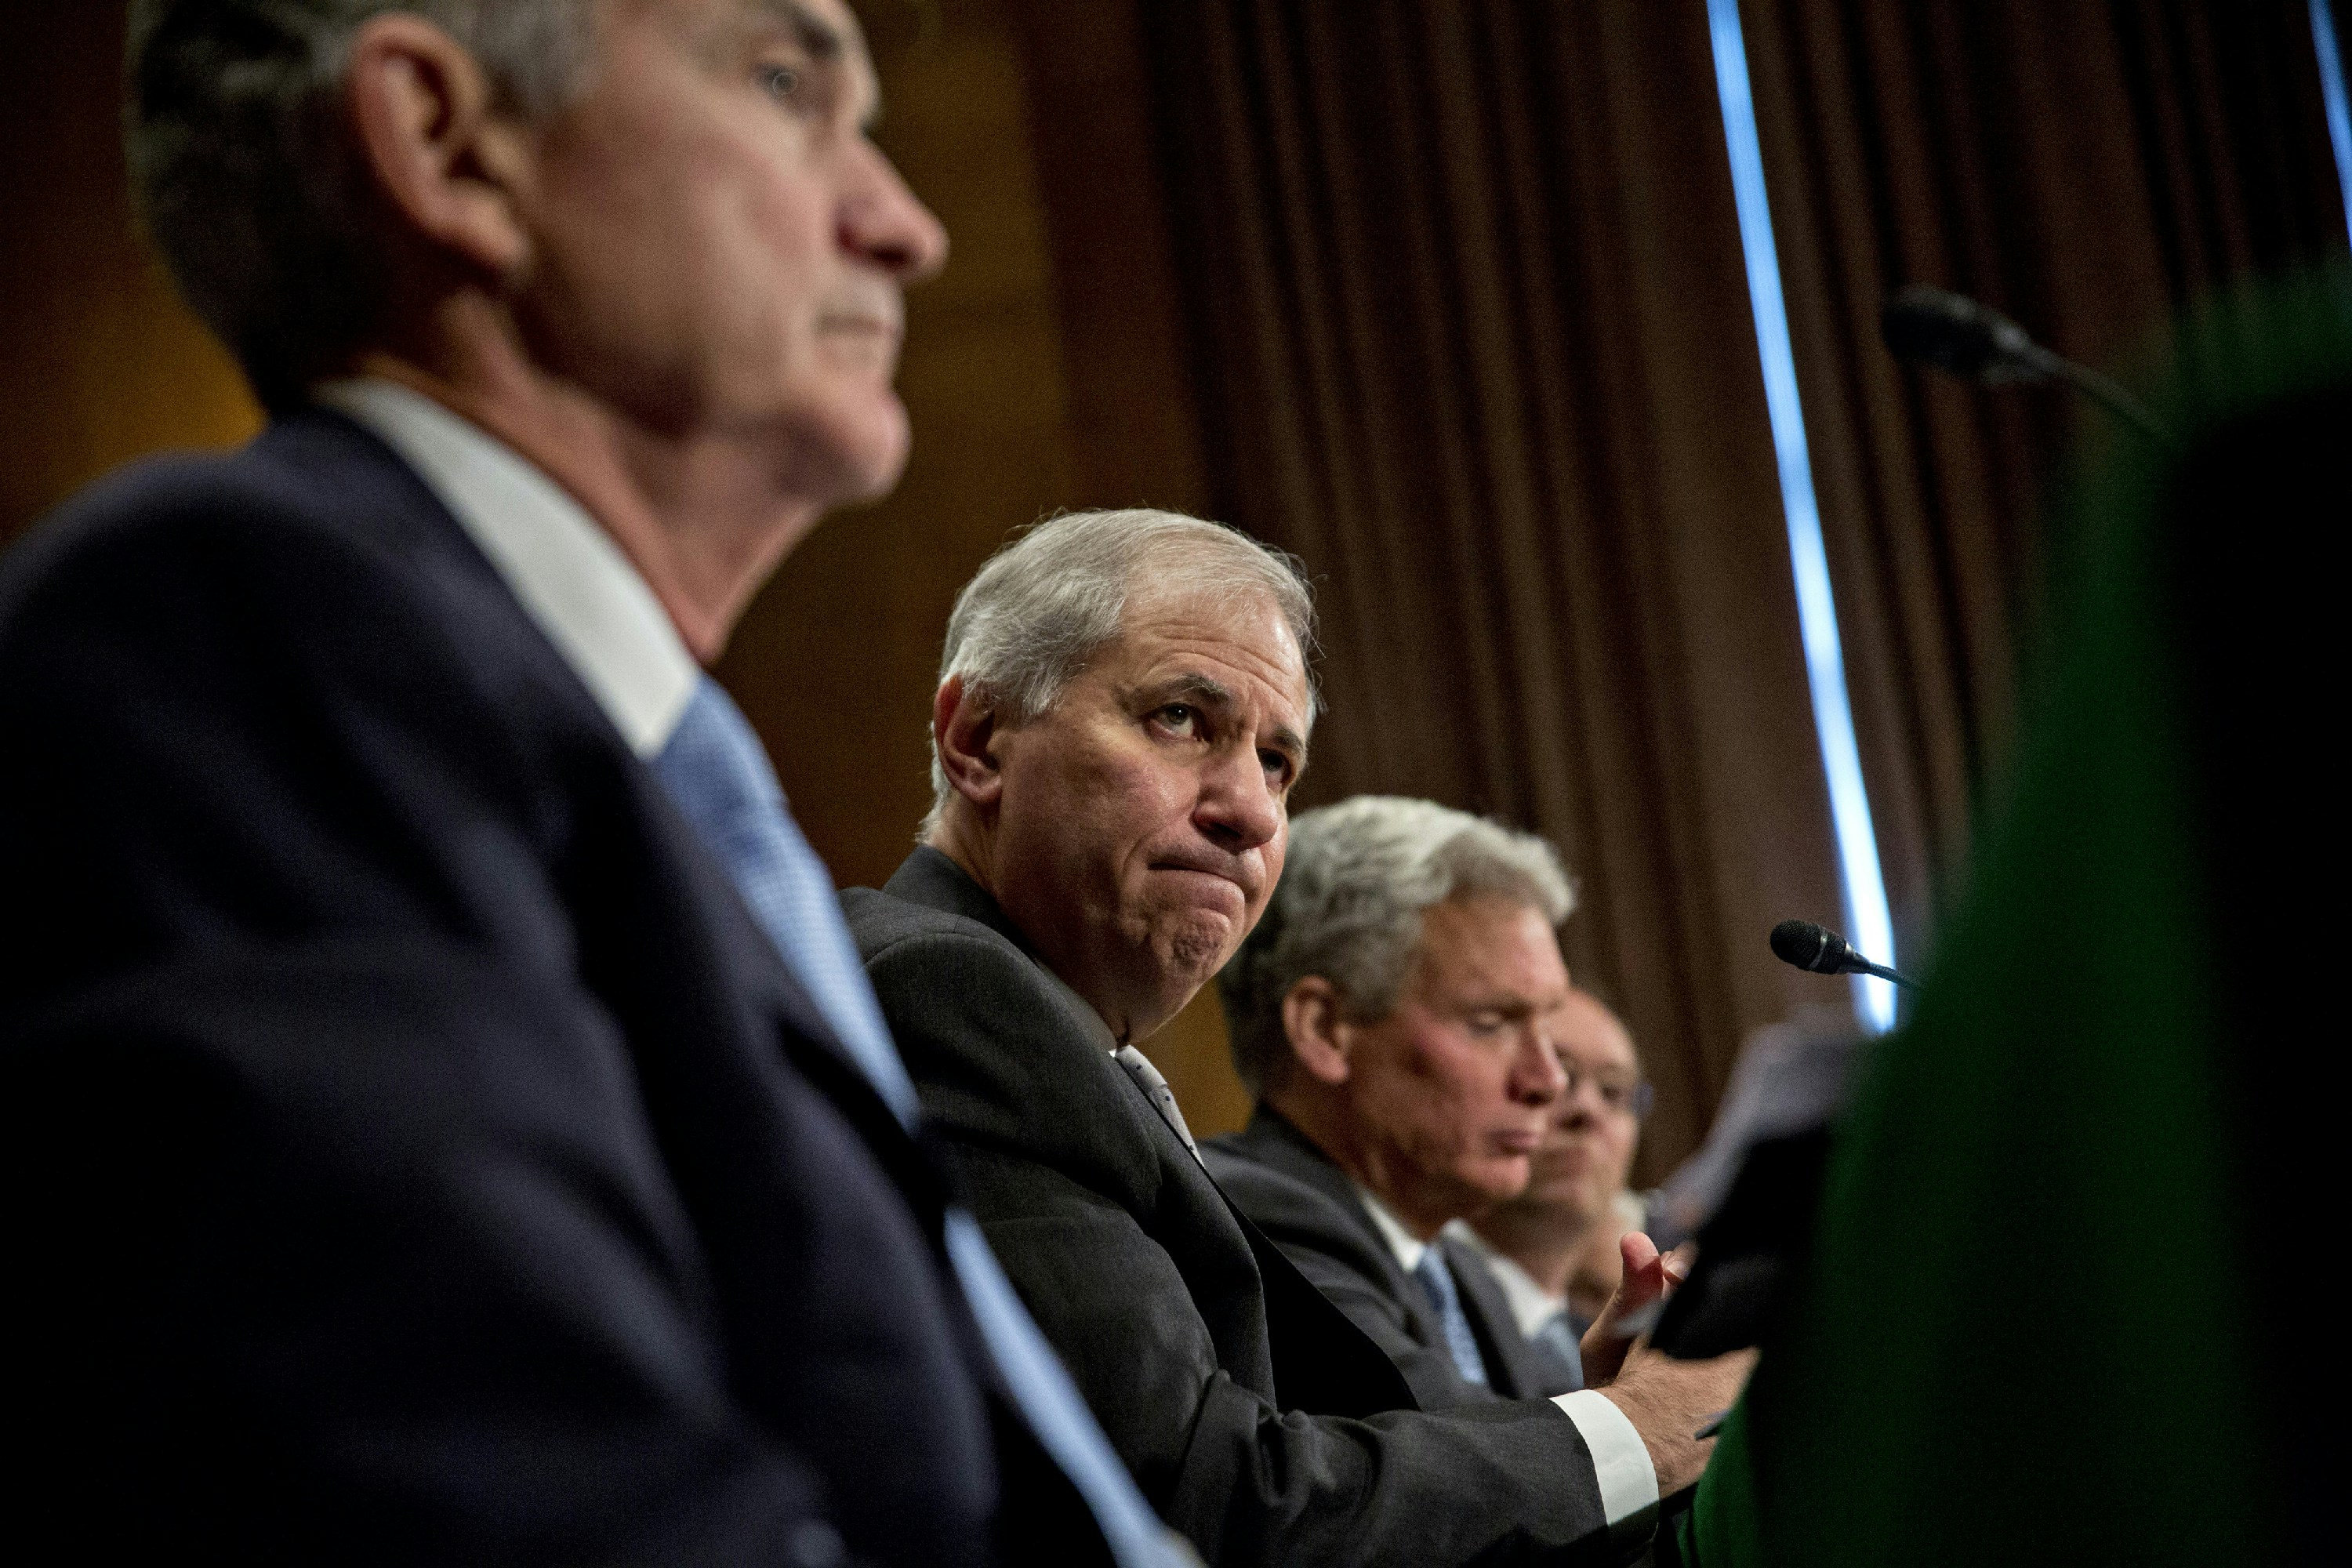 Martin Gruenberg, chairman of the Federal Deposit Insurance Corp. (FDIC), center, and Jerome Powell, governor of the U.S. Federal Reserve, left, listen during a Senate Banking Committee hearing in Washington, D.C., U.S., on Thursday, June 22, 2017. Top U.S. banking regulators are sprinting to ease the Volcker Rule, stress tests and other constraints on Wall Street after the Trump administration issued a long list of proposals last week for rolling back post-crisis financial rules. Photographer: Andrew Harrer/Bloomberg via Getty Images